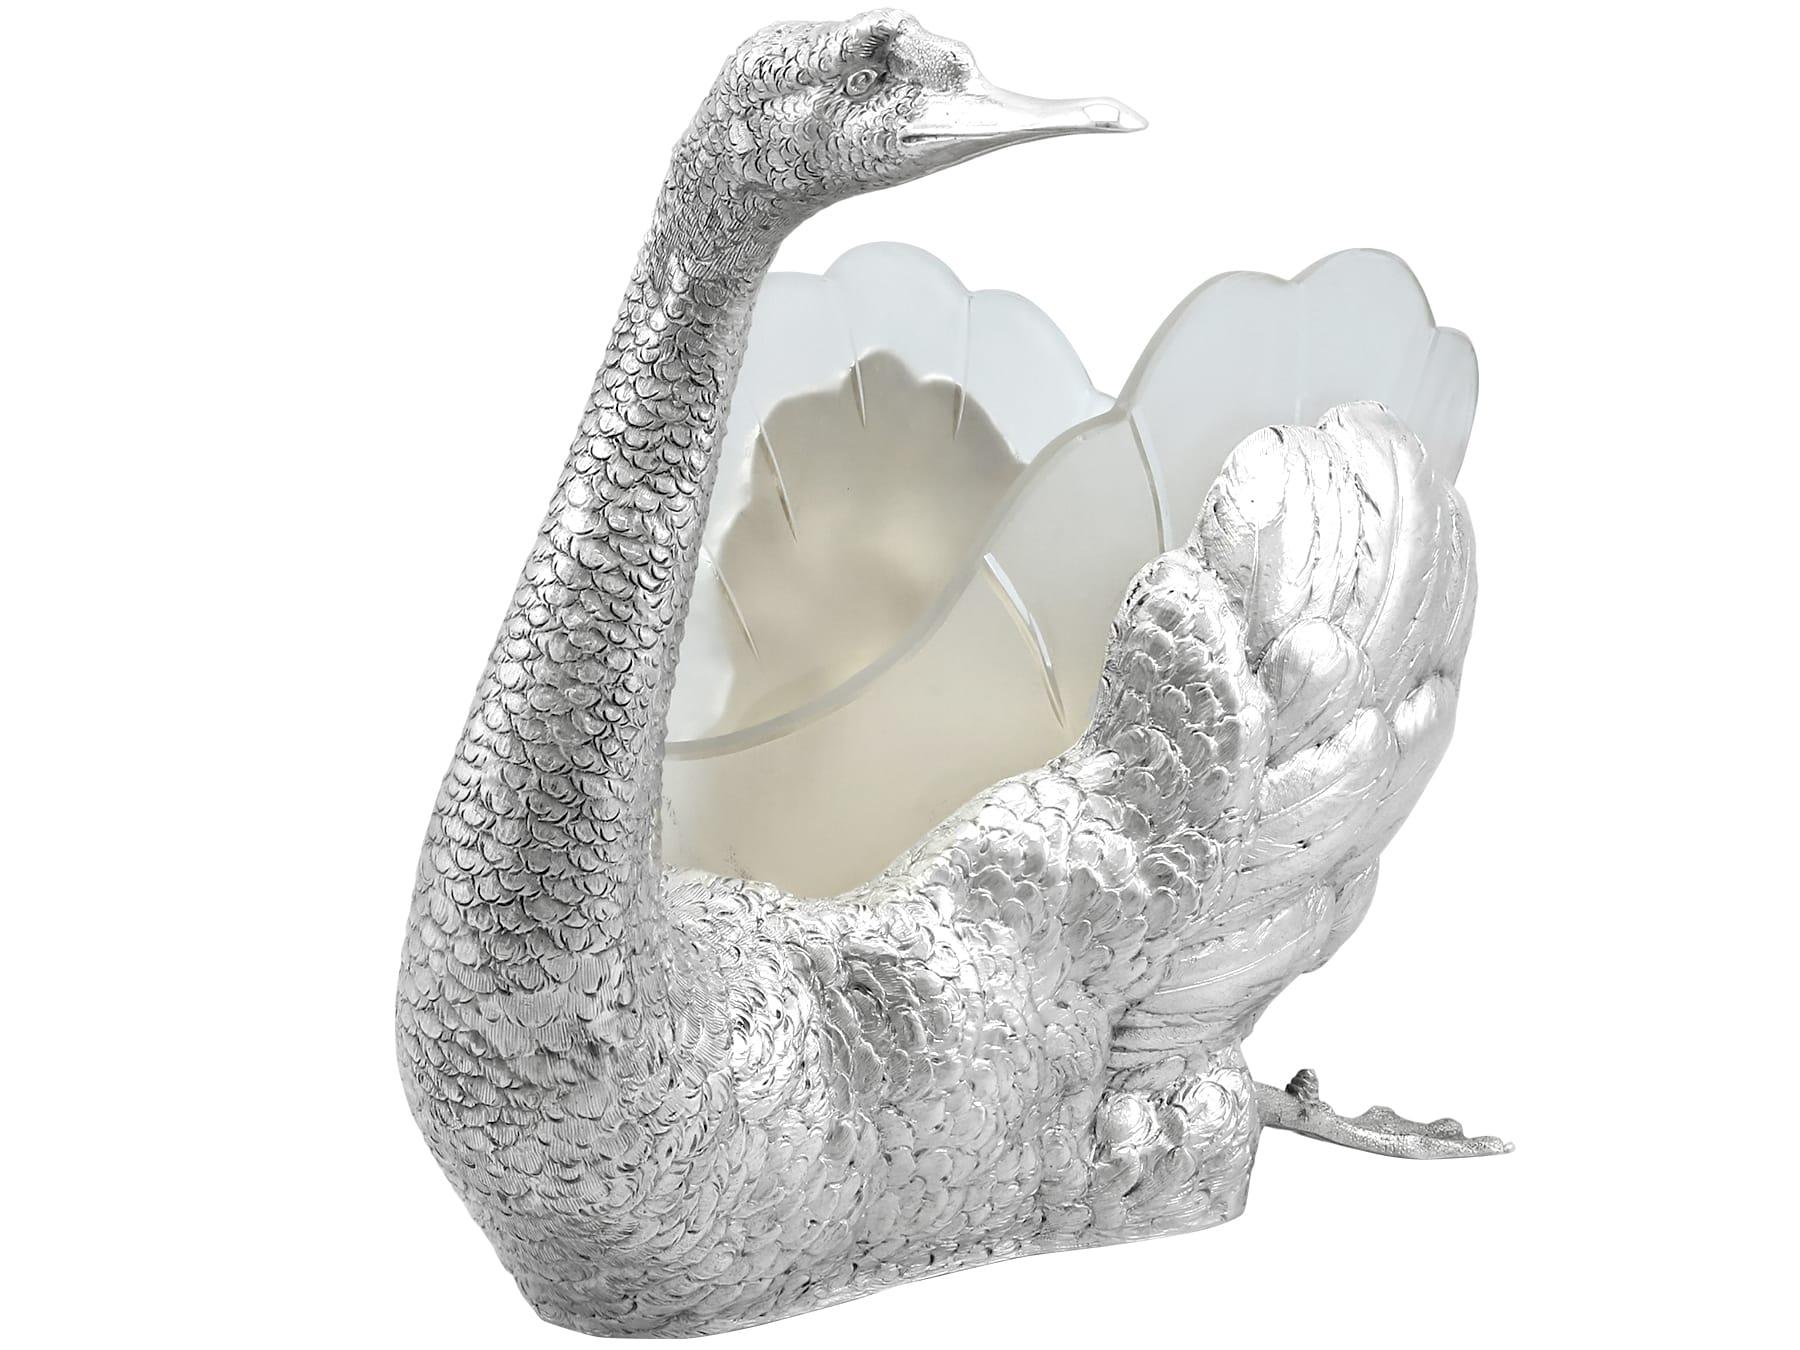 1910s German Silver and Glass Swan Dish / Centrepiece In Excellent Condition For Sale In Jesmond, Newcastle Upon Tyne